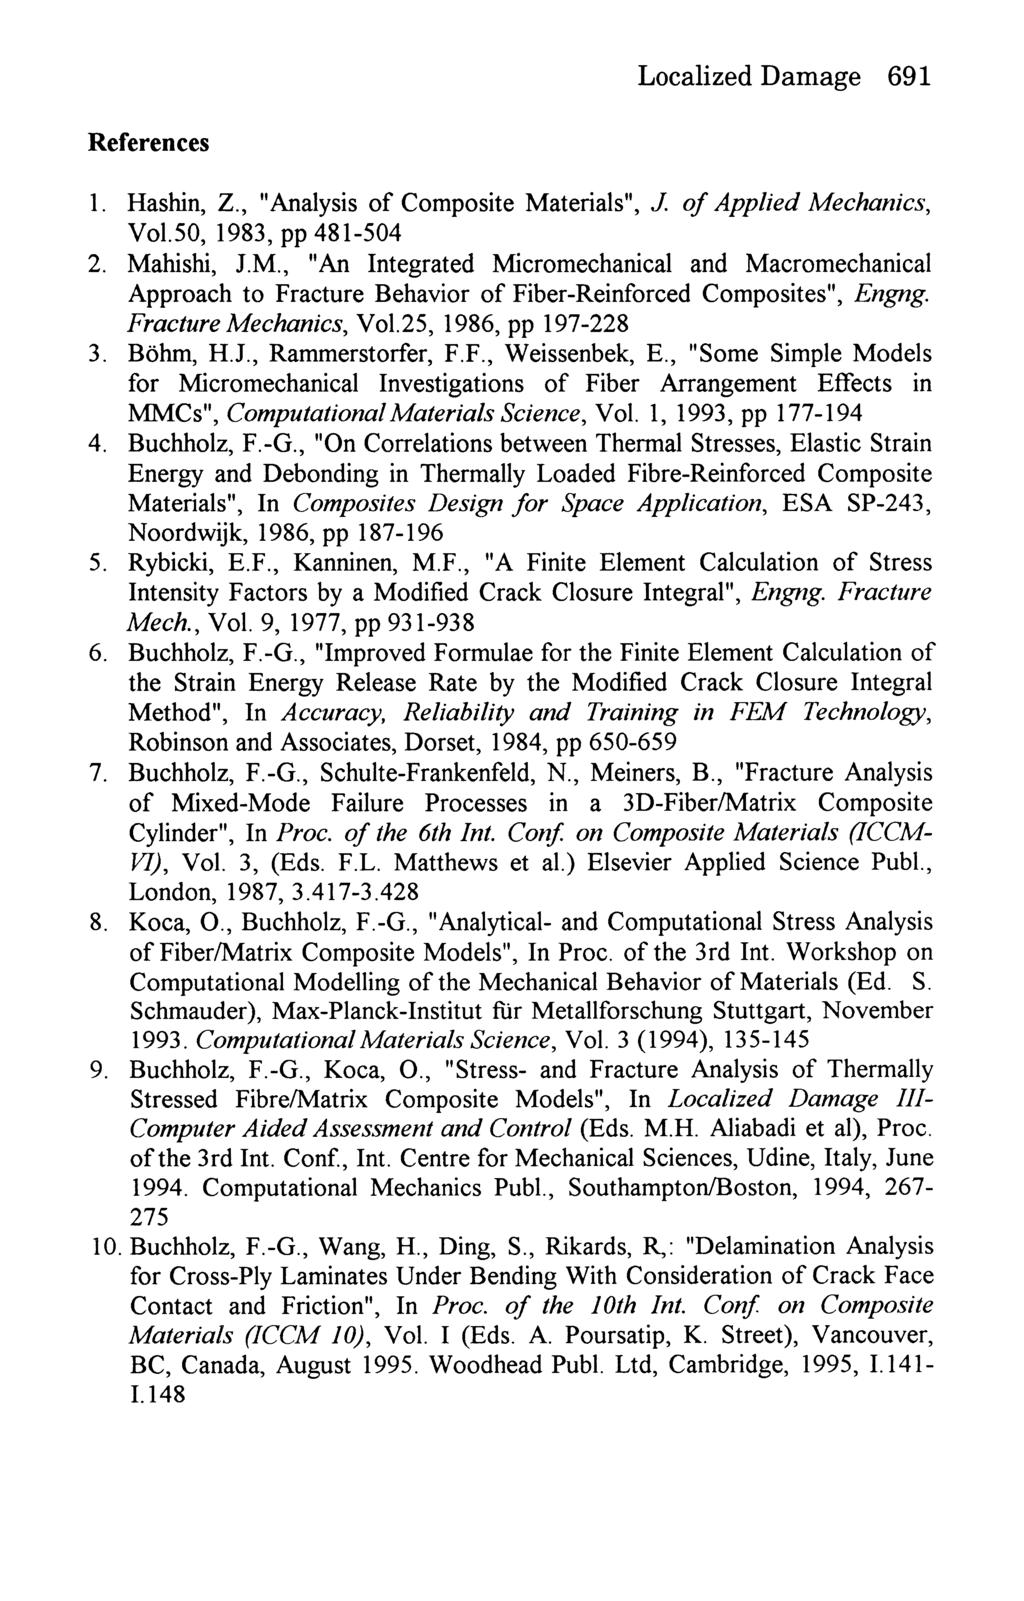 References Localized Damage 691 1. Hashin, Z, "Analysis of Composite Materials", J. of Applied Mechanics, Vol.50, 1983, pp 481-504 2. Mahishi, J.M., "An Integrated Micromechanical and Macromechanical Approach to Fracture Behavior of Fiber-Reinforced Composites", Engng.